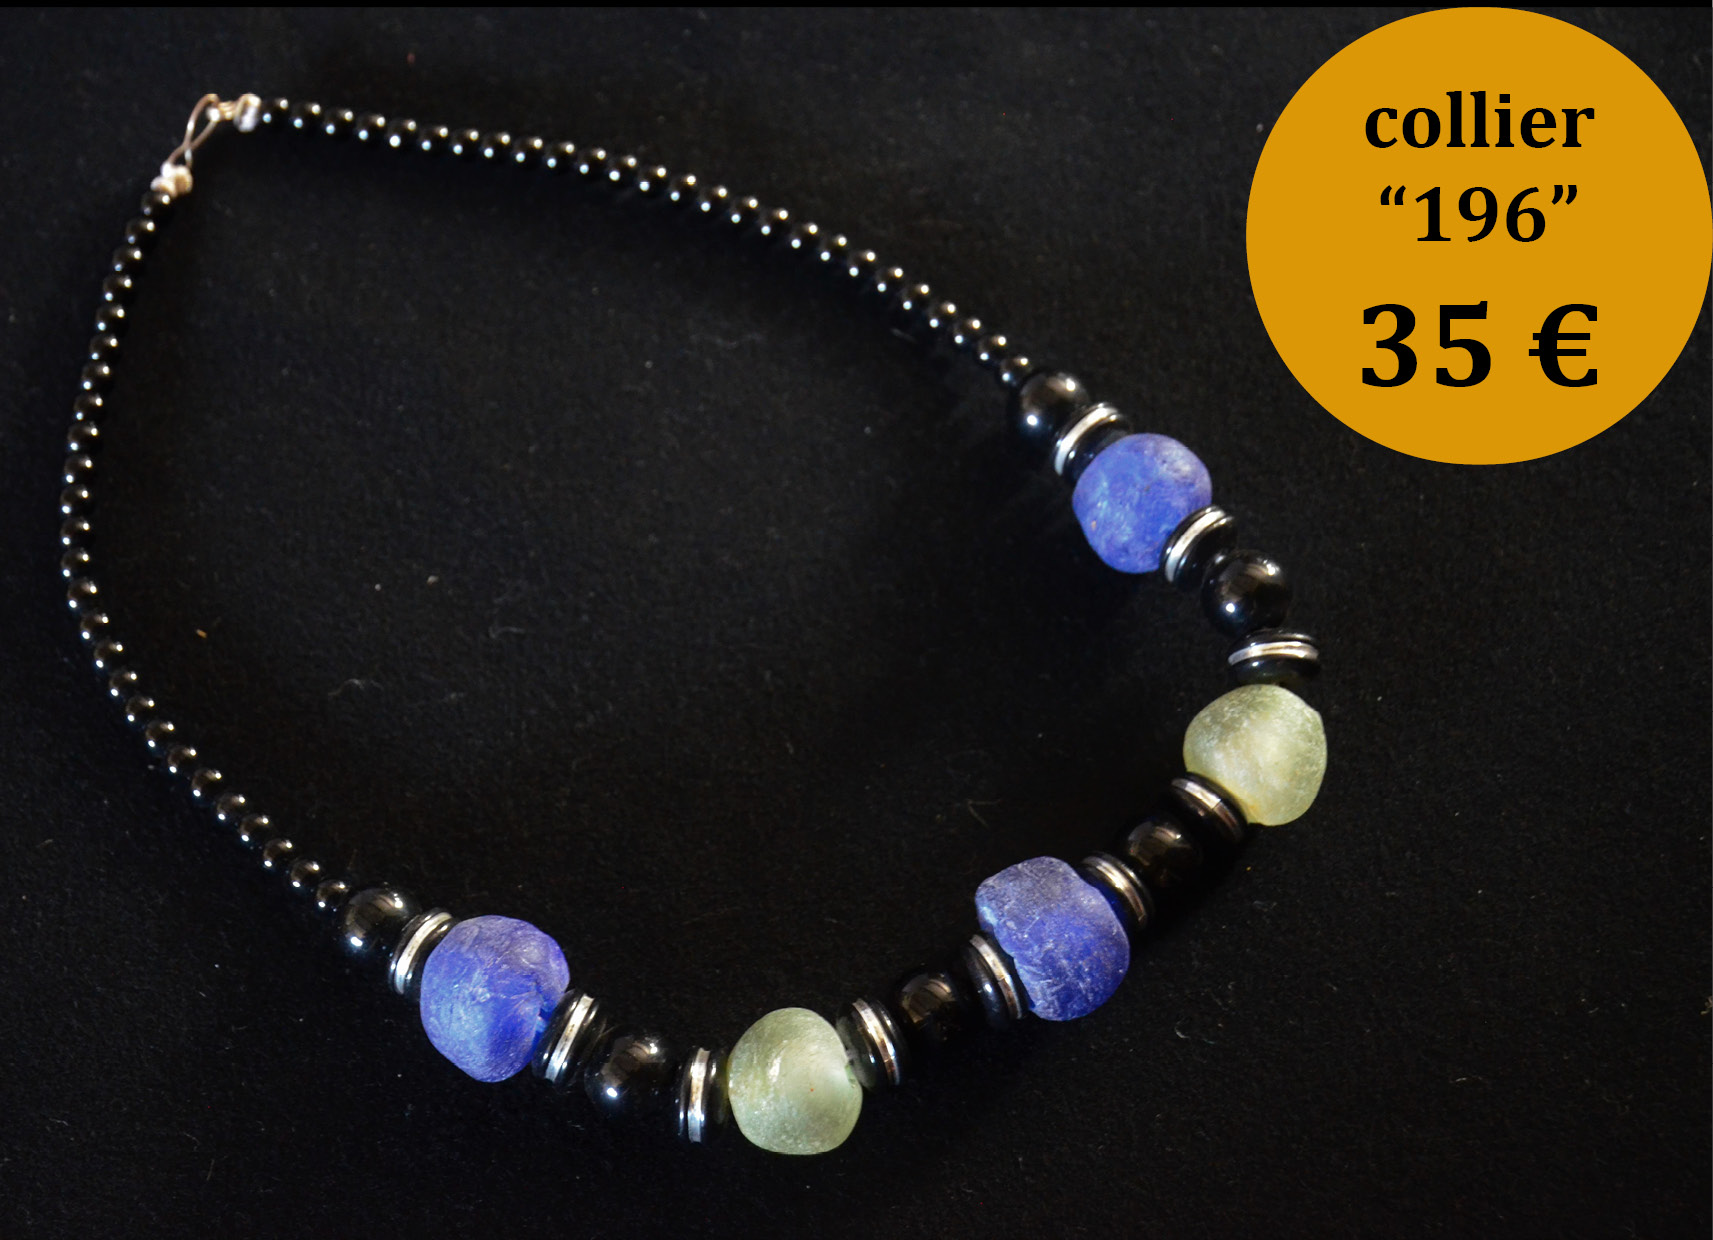 Collier "196"